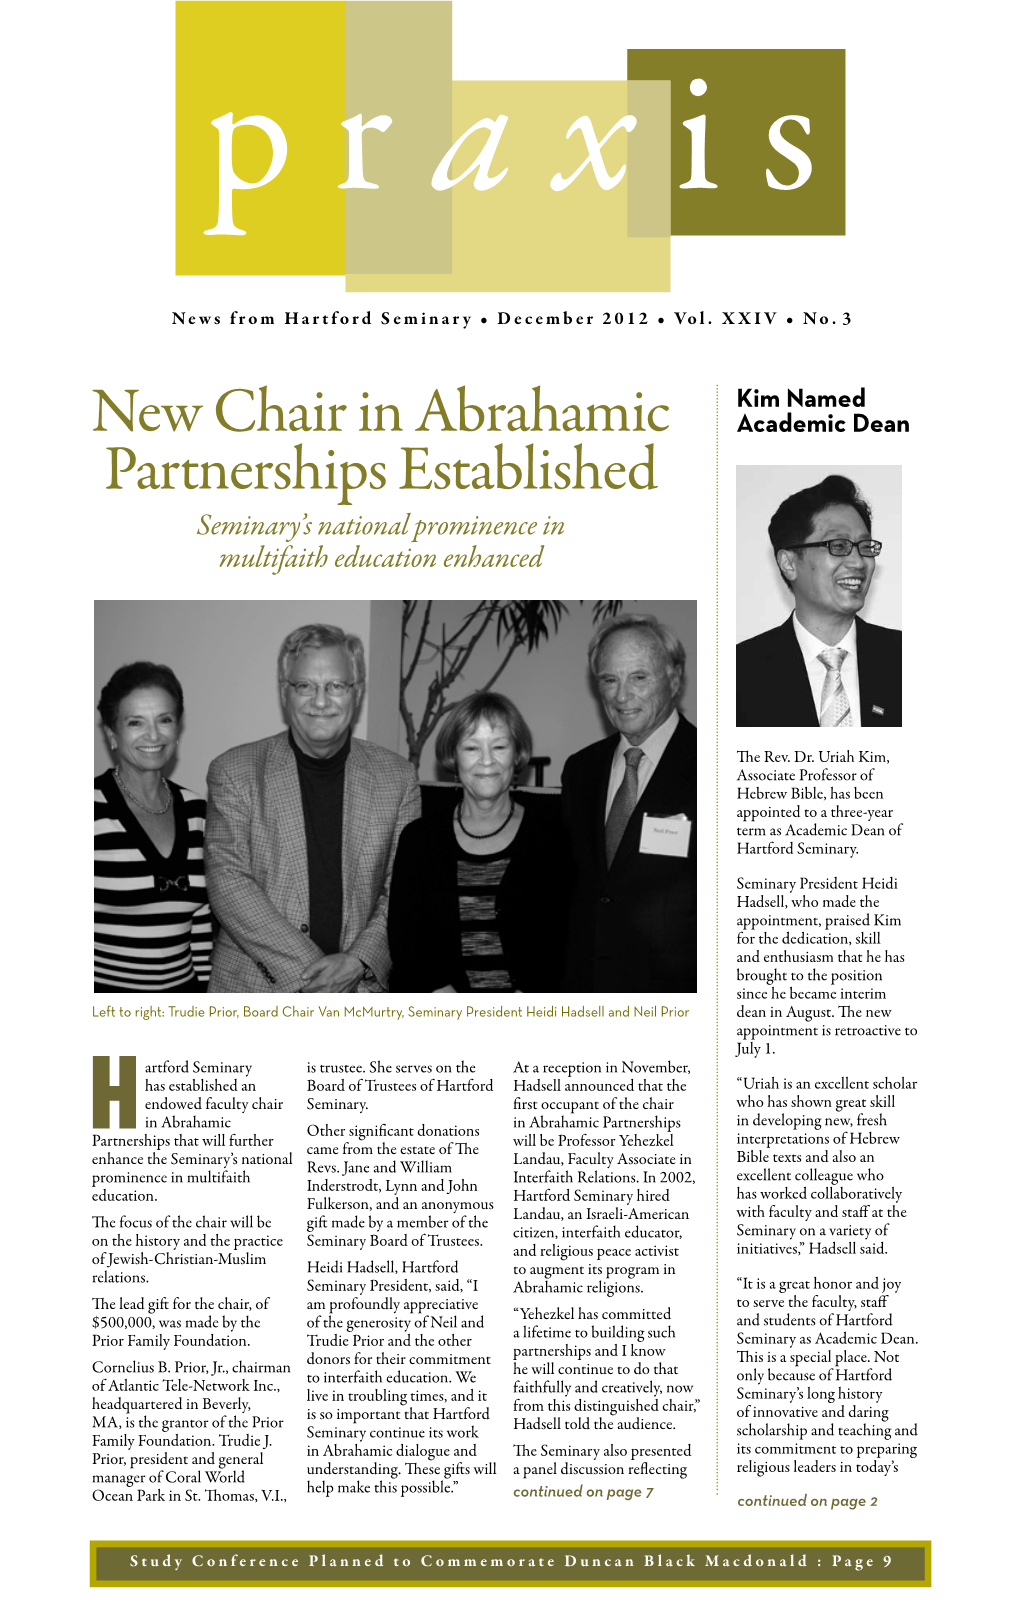 New Chair in Abrahamic Partnerships Established